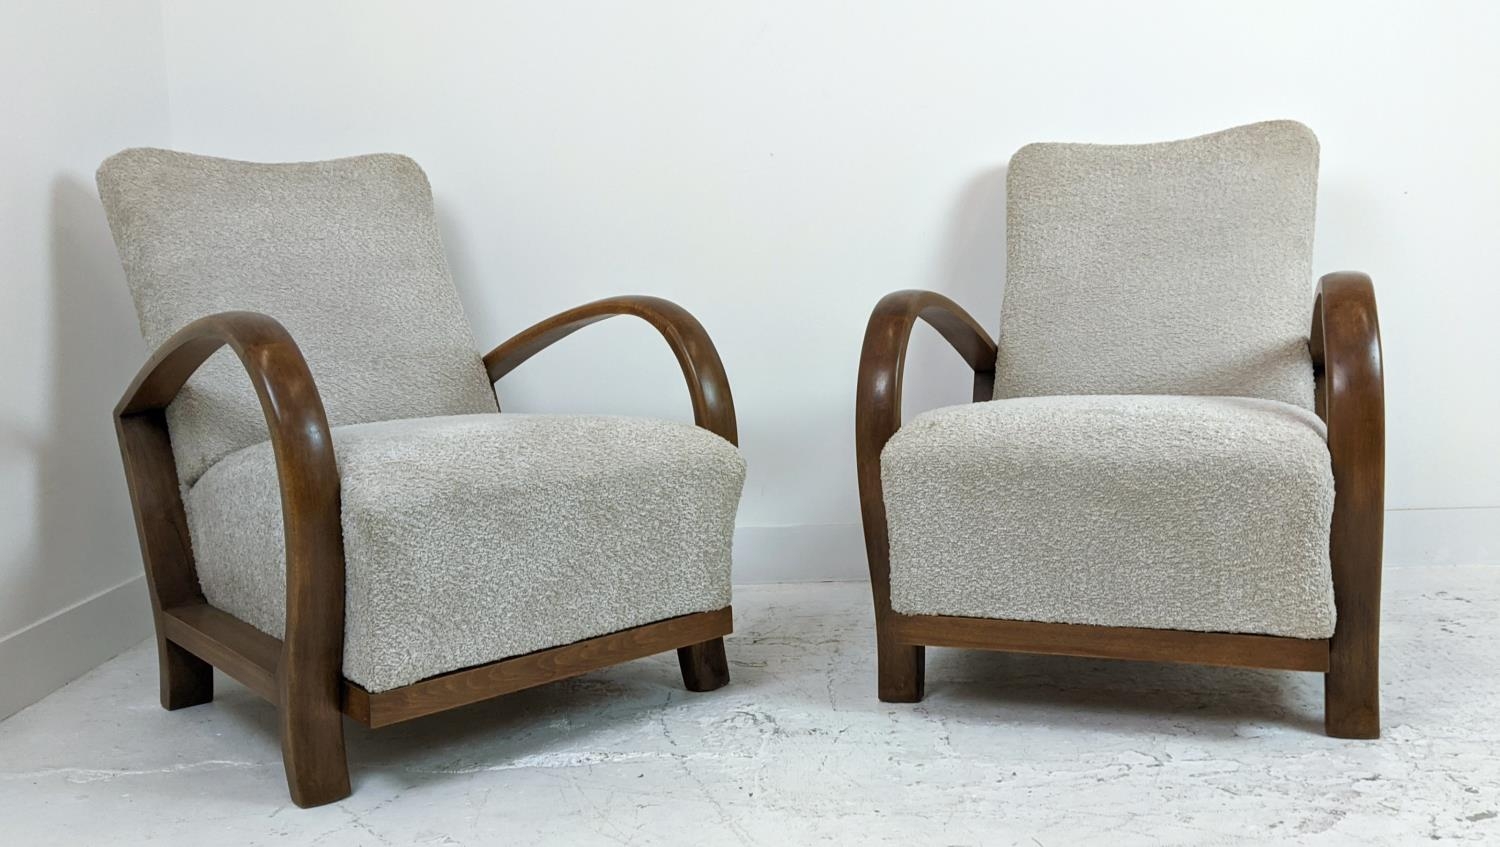 HALABALA ARMCHAIRS, a pair, mid 20th century beechwood and boucle wool upholstered, 89cm H x 66cm - Image 3 of 8